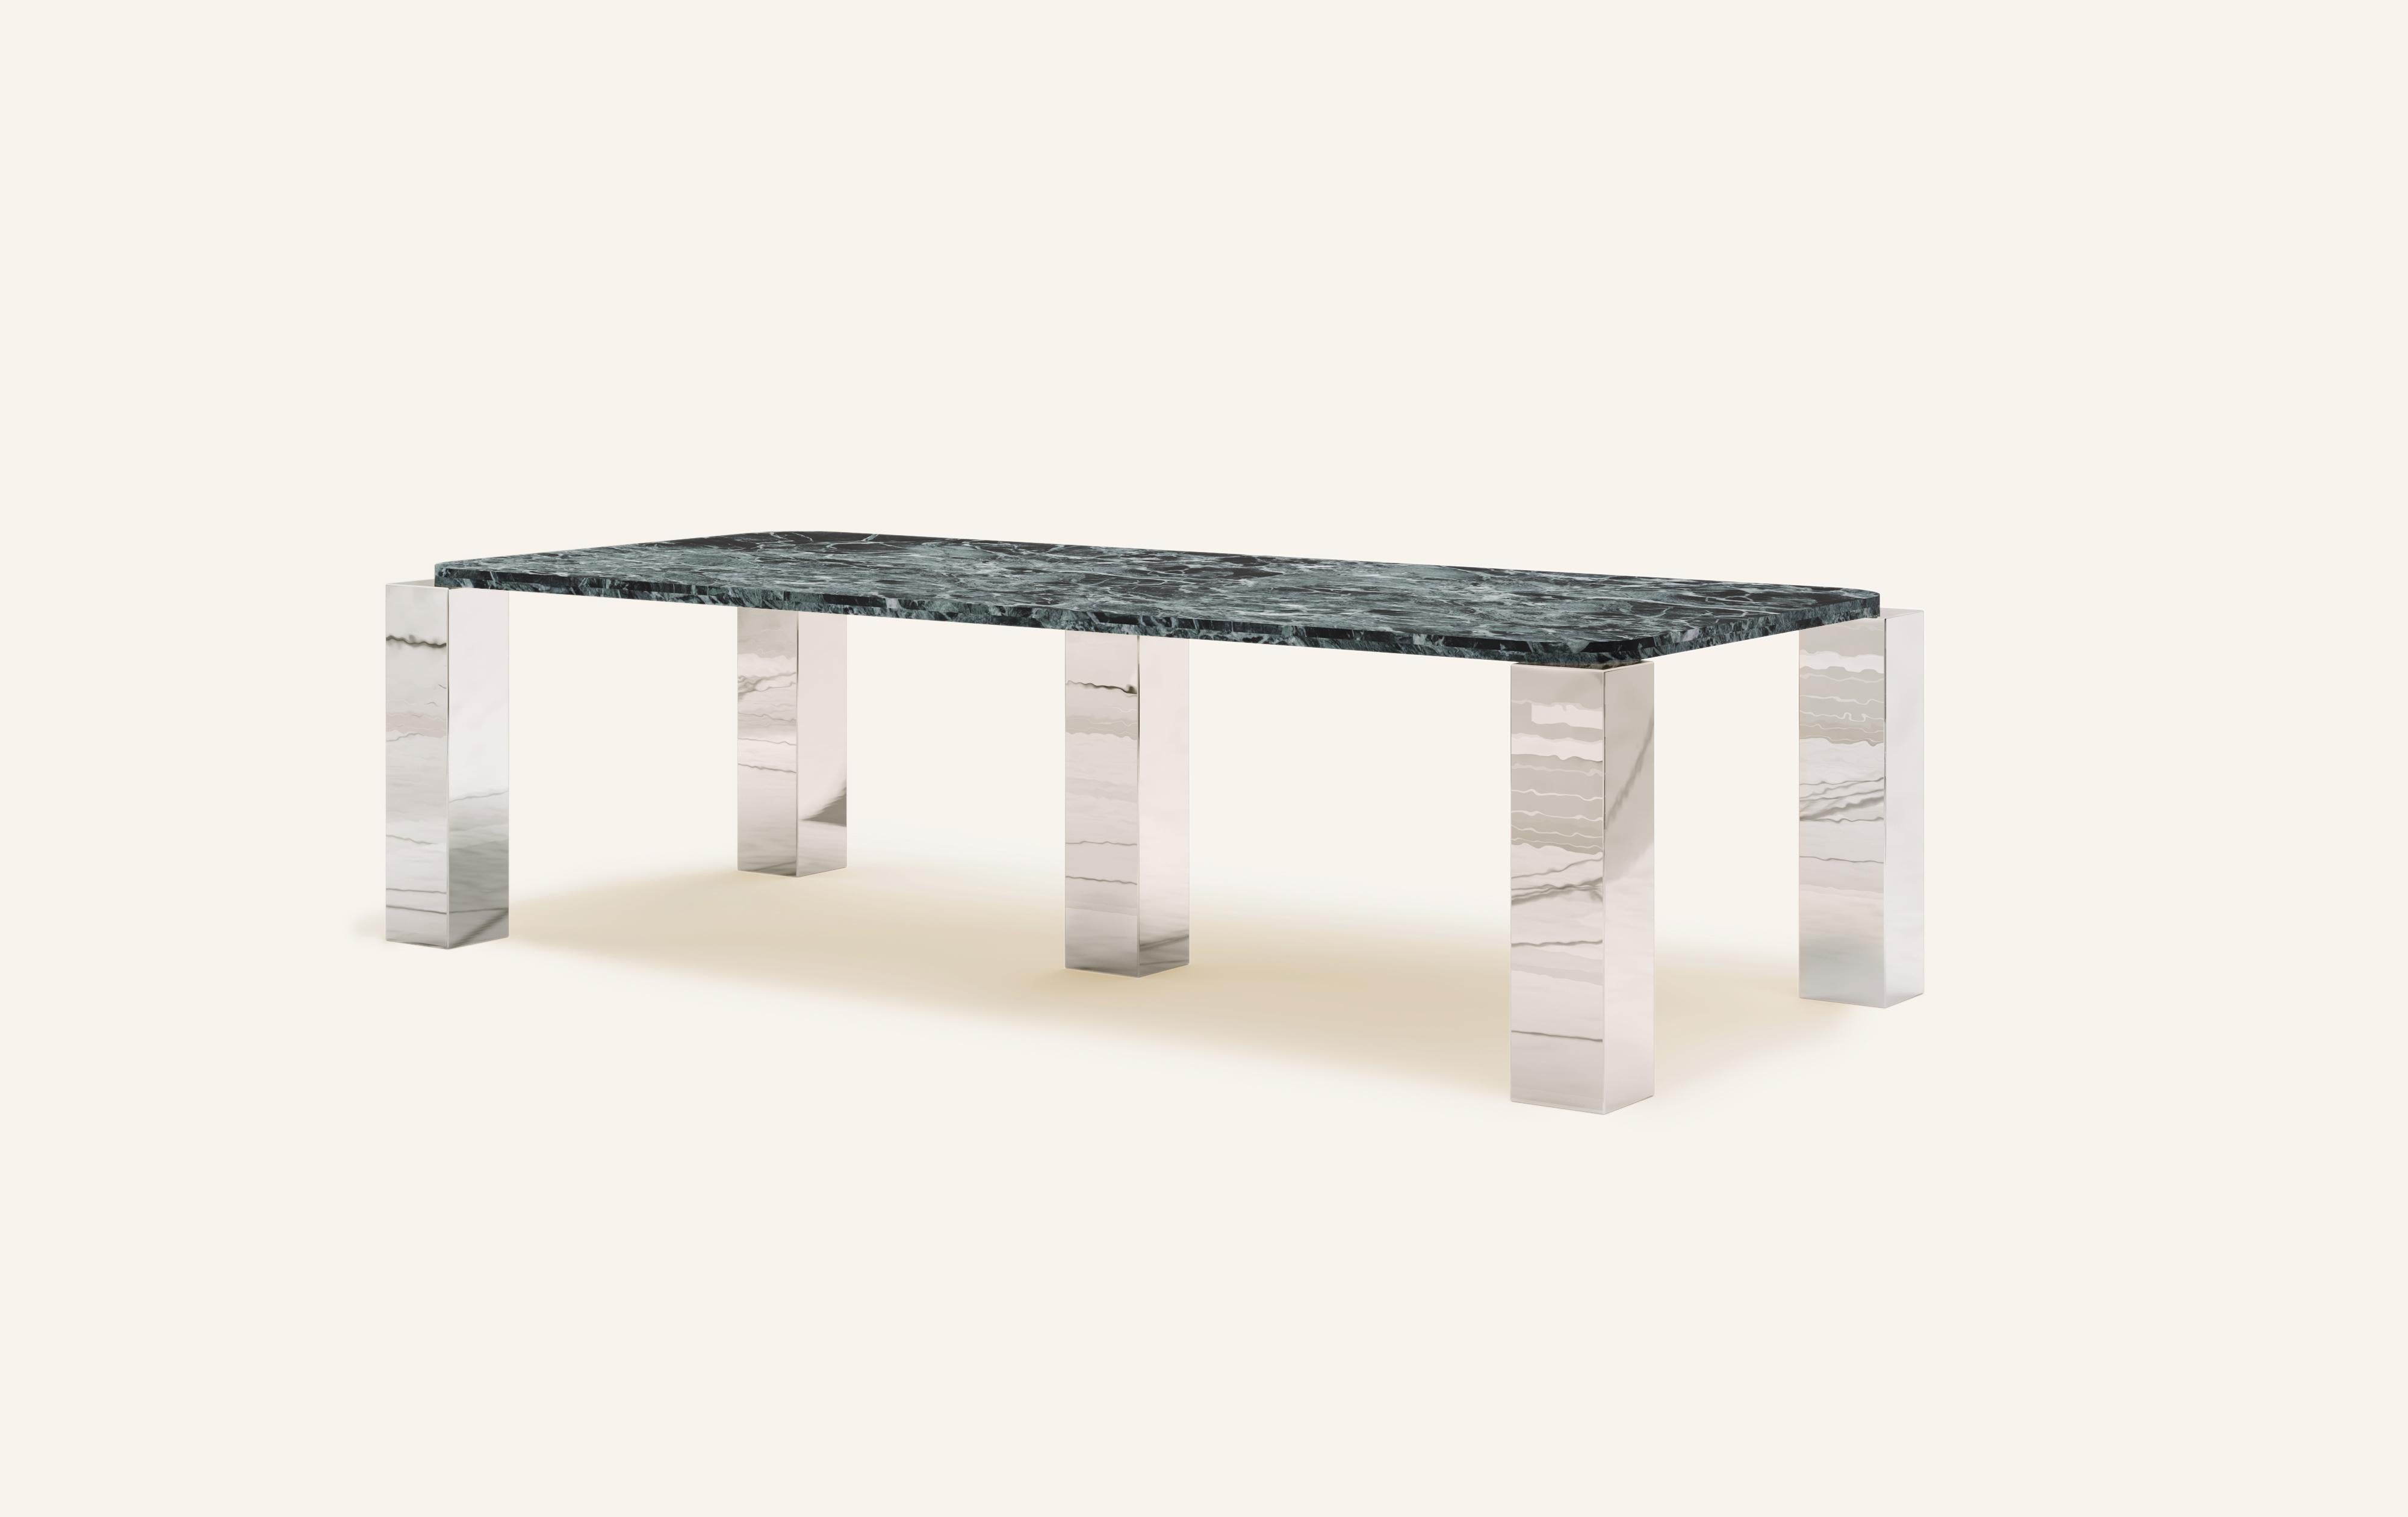 Organic Modern FORM(LA) Cubo Rectangle Dining Table 110”L x 50”W x 30”H Verde Marble & Chrome For Sale